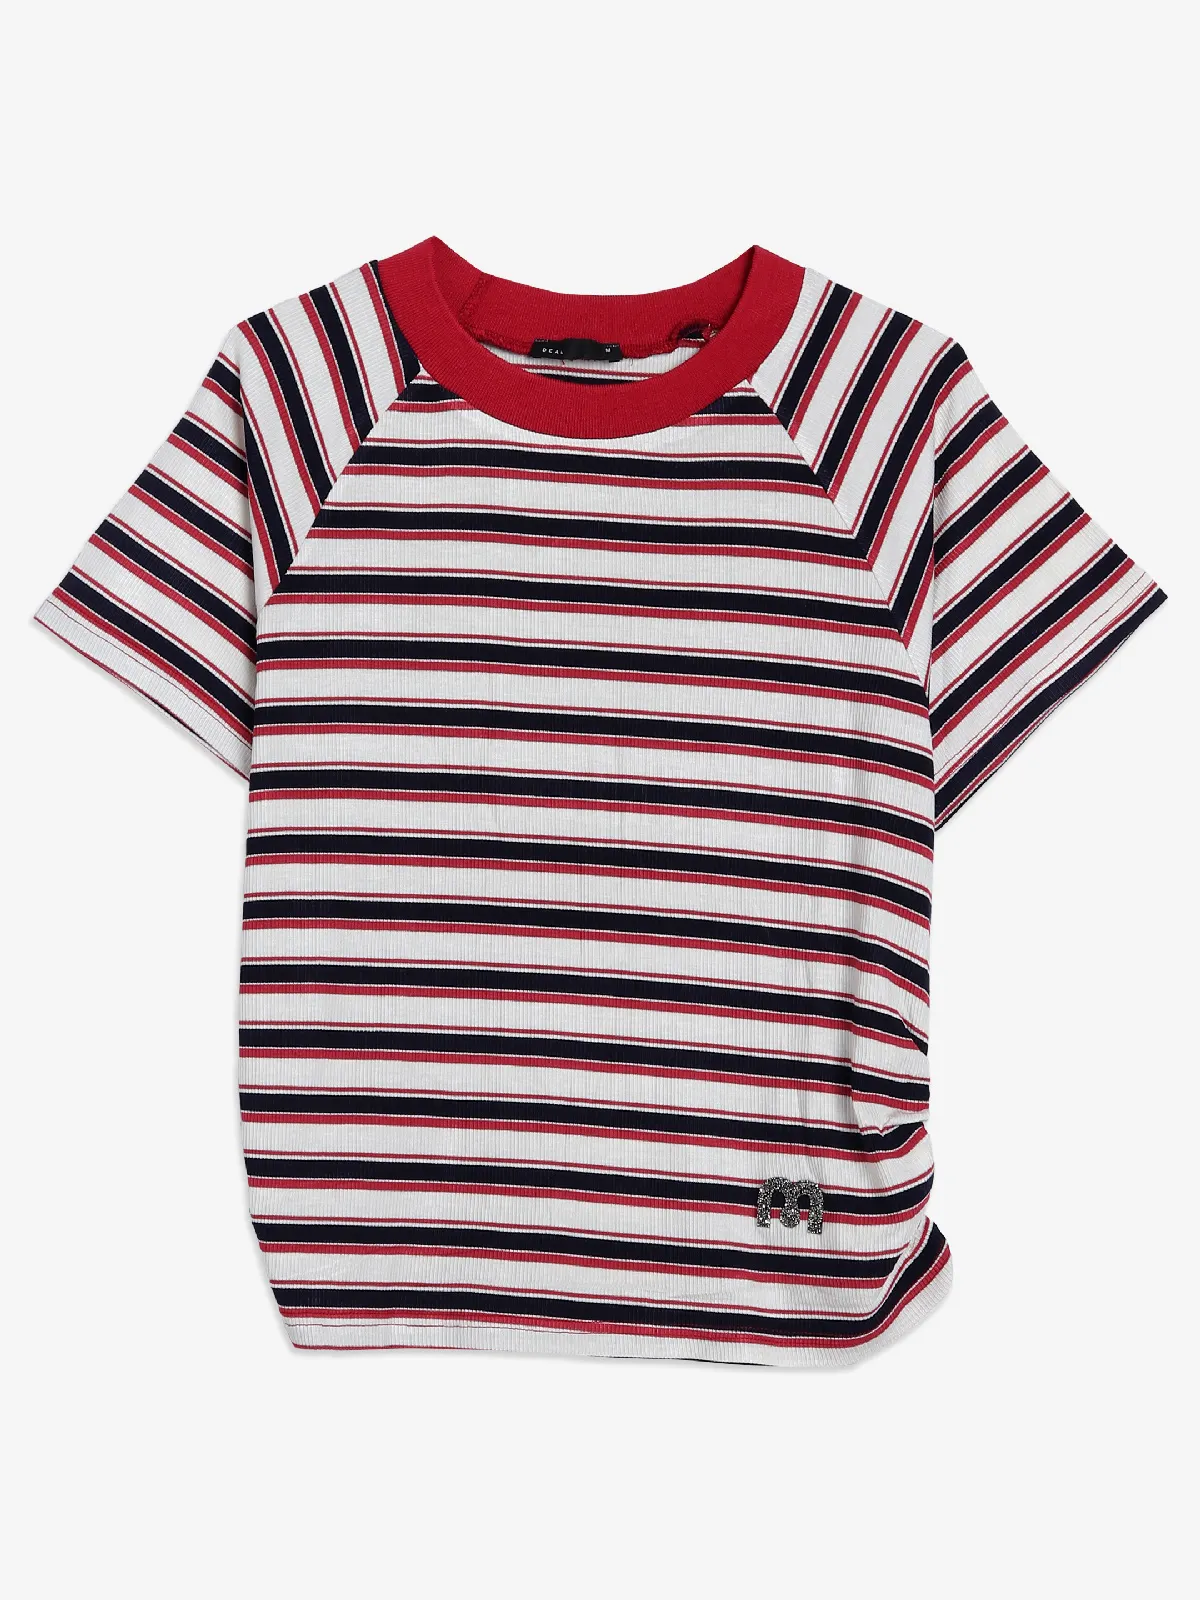 Deal red stripe top for casual